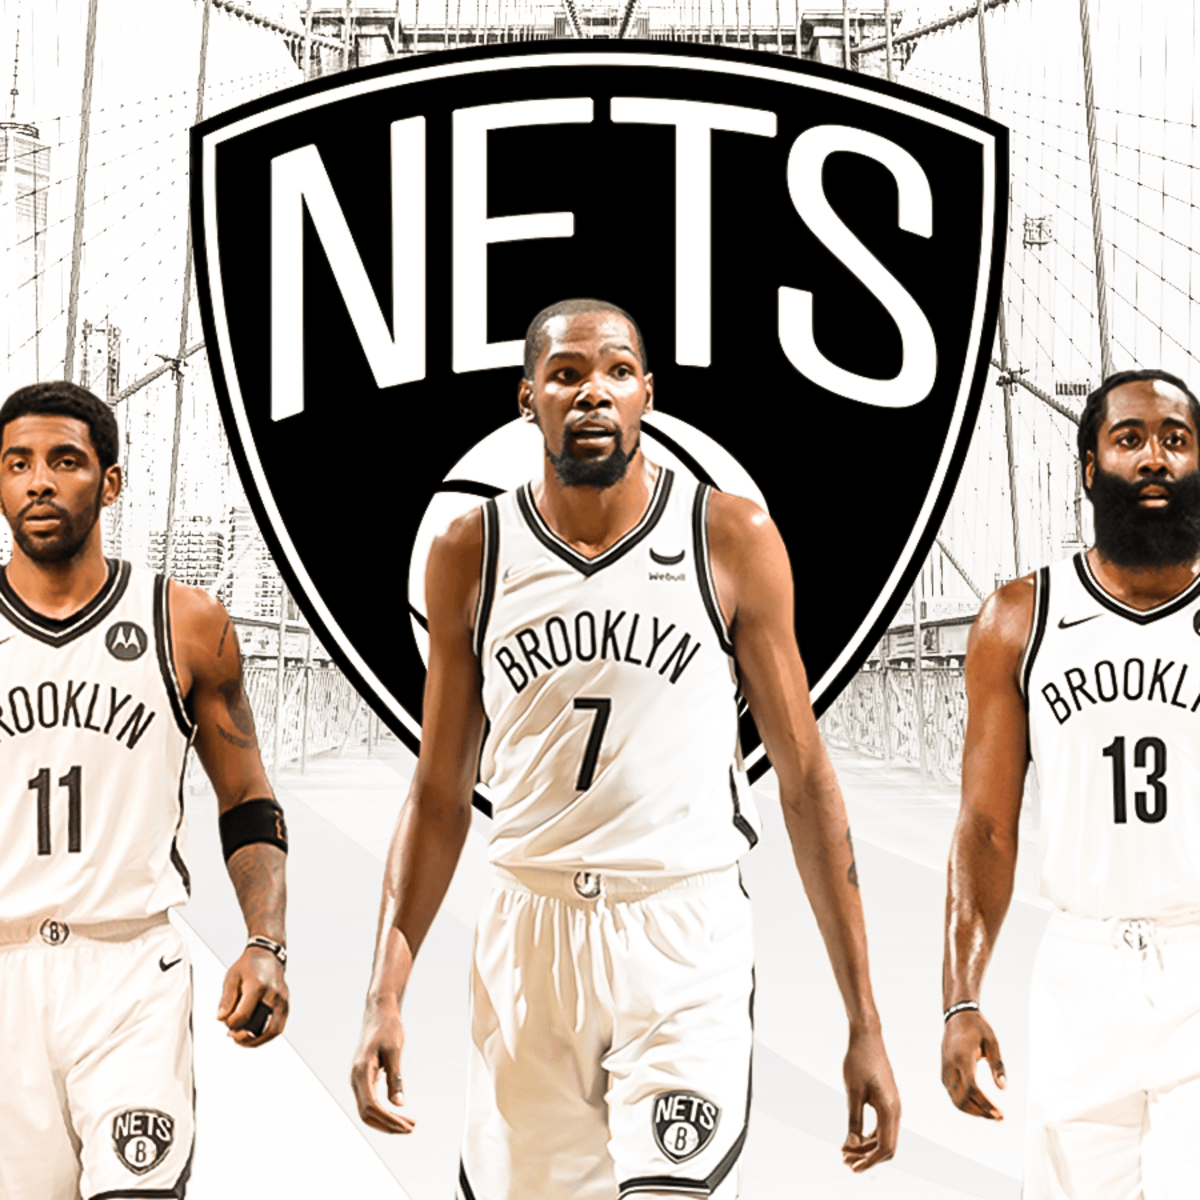 The Nets Big 3 is dead  and so are the Nets 